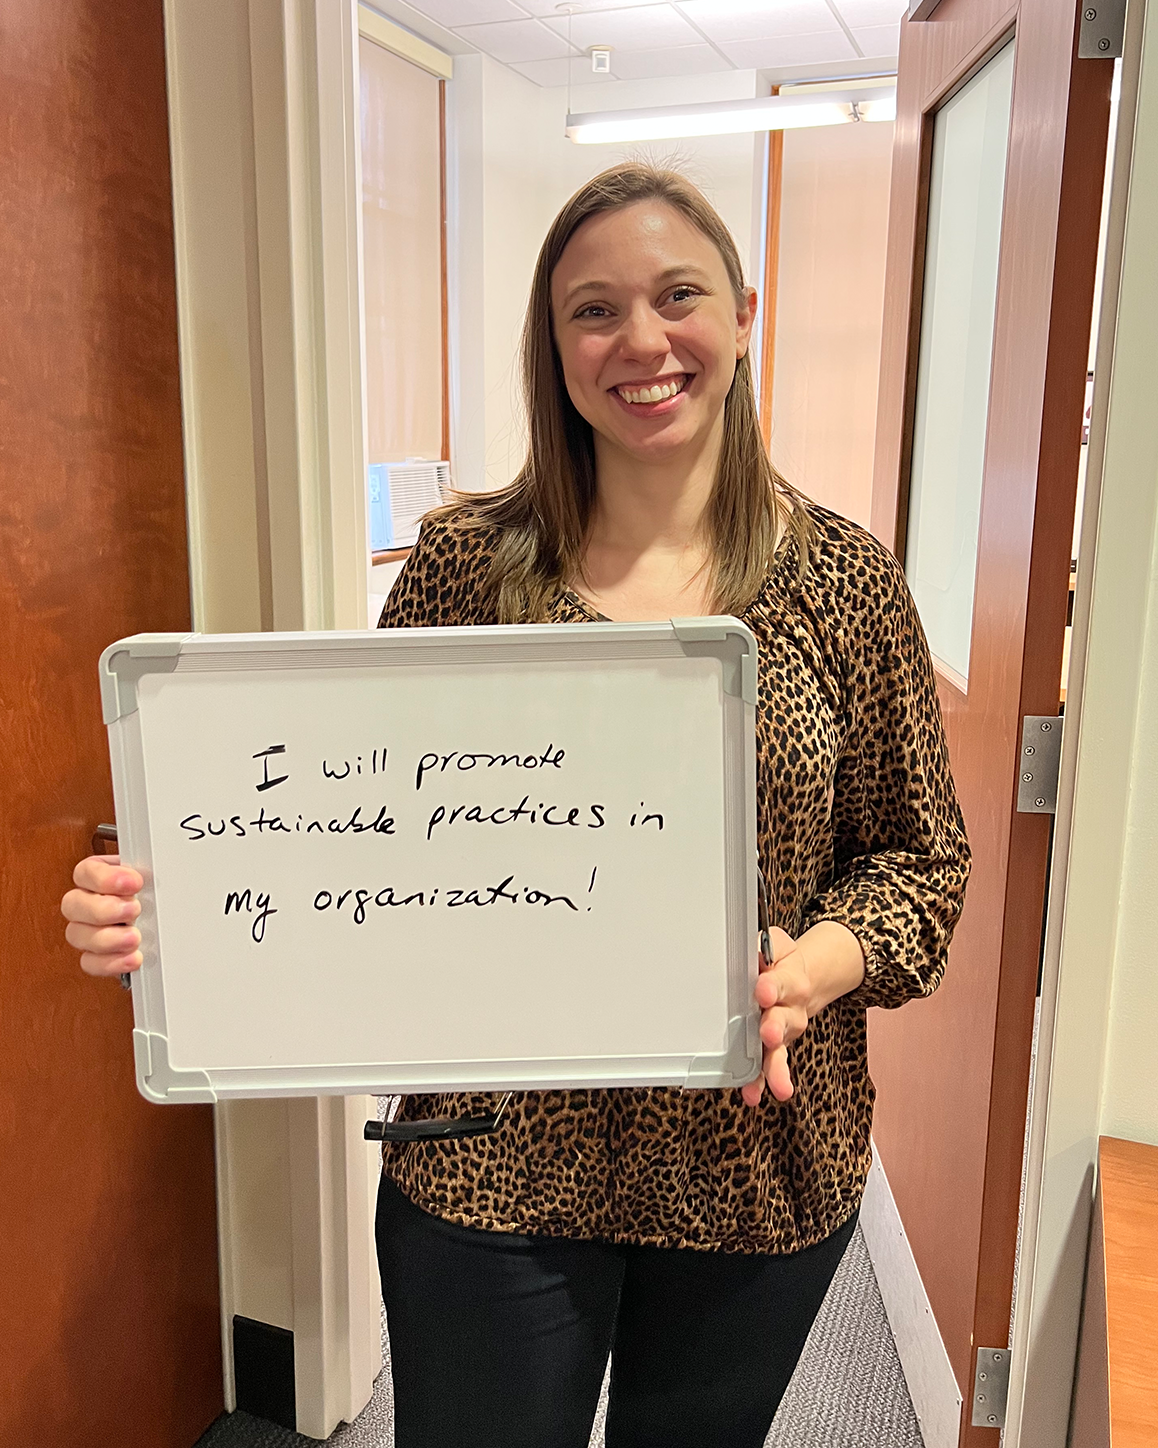 CMU ChemE community members share their commitment to sustainability